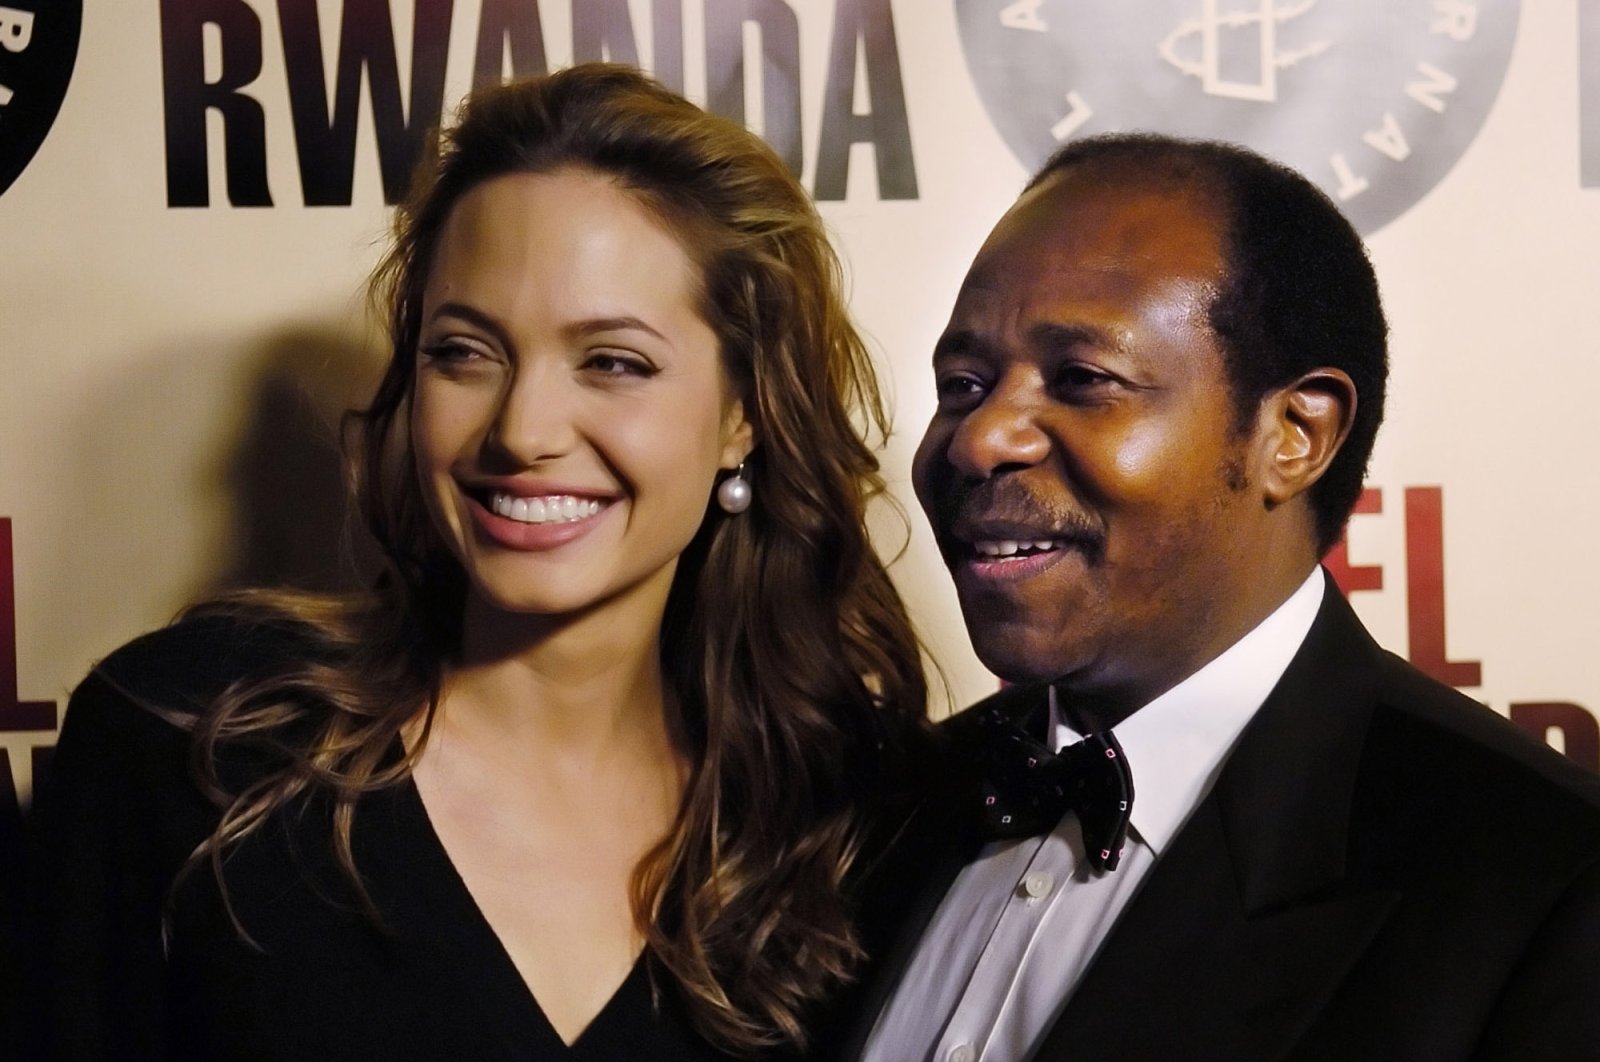 Paul Rusesabagina, the inspiration for the film "Hotel Rwanda," poses with actress Angelina Jolie at the premiere of the film at the Academy of Motion Picture Arts & Sciences in Beverly Hills, California on Dec. 2, 2004. (AP Photo)